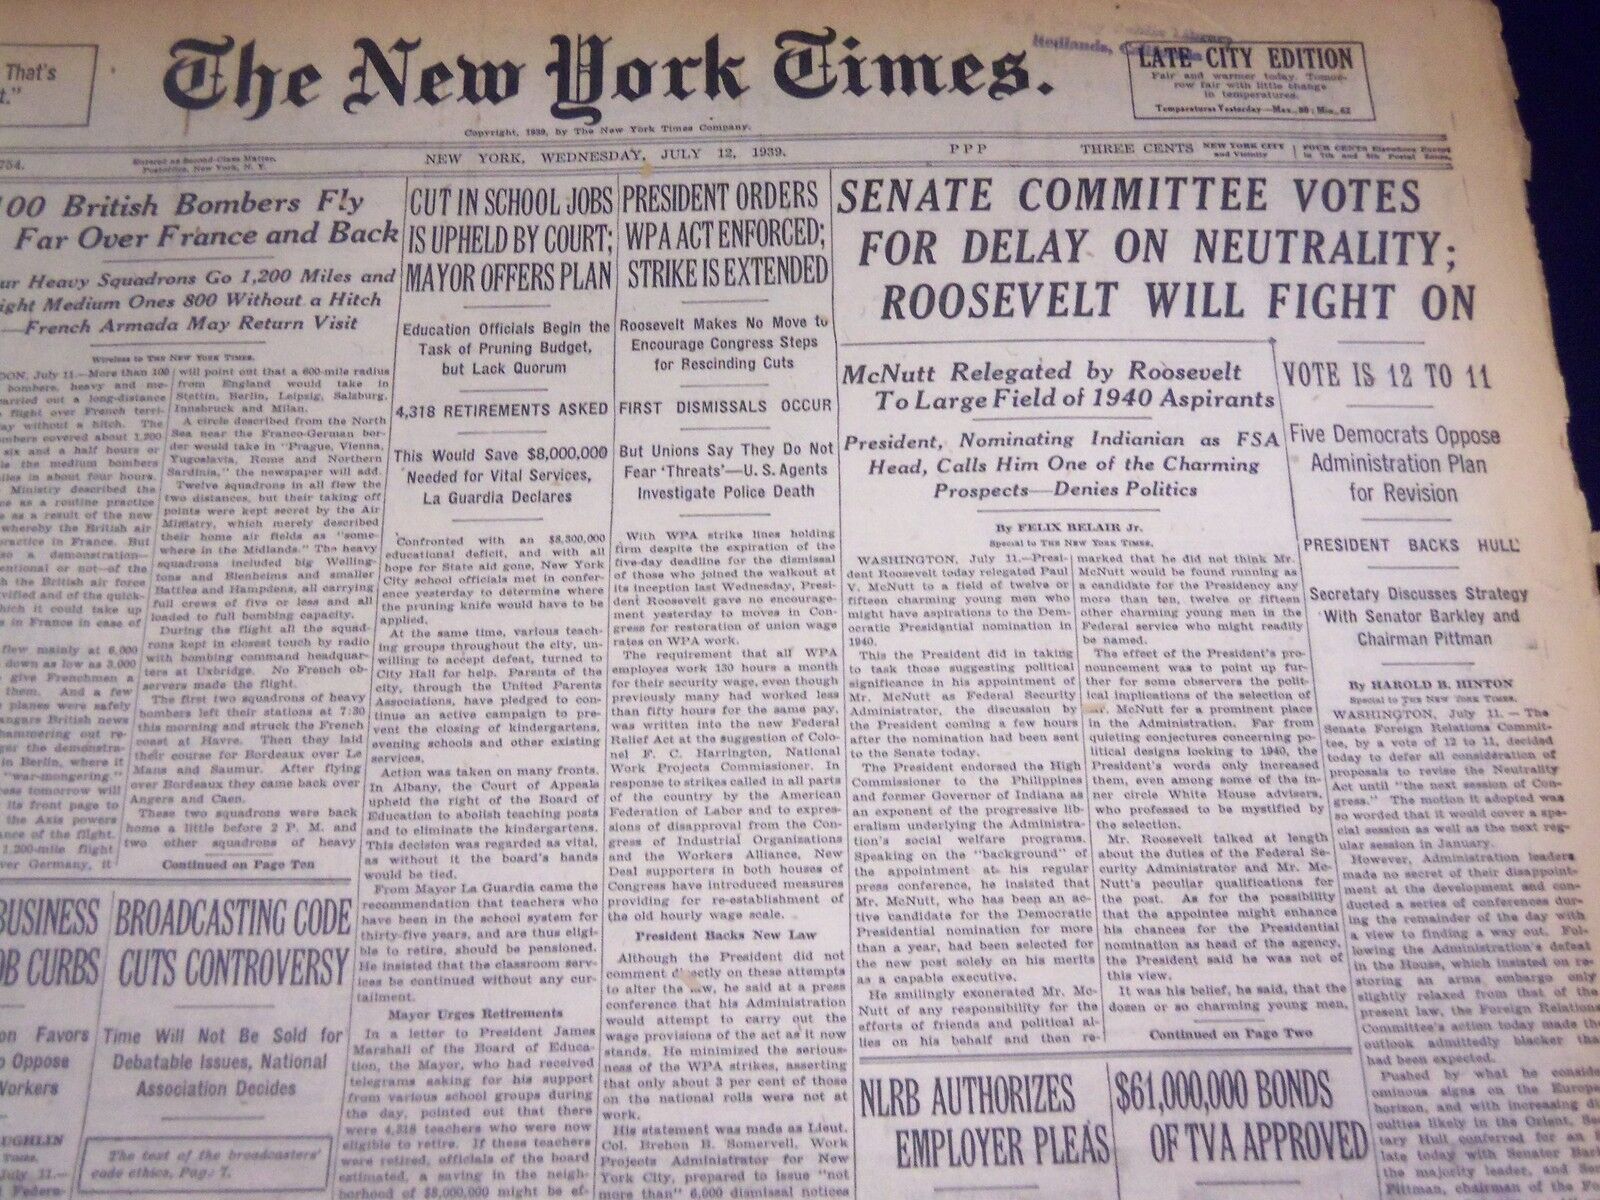 1939 JULY 12 NEW YORK TIMES - DELAY ON NEUTRALITY VOTED - NT 3676